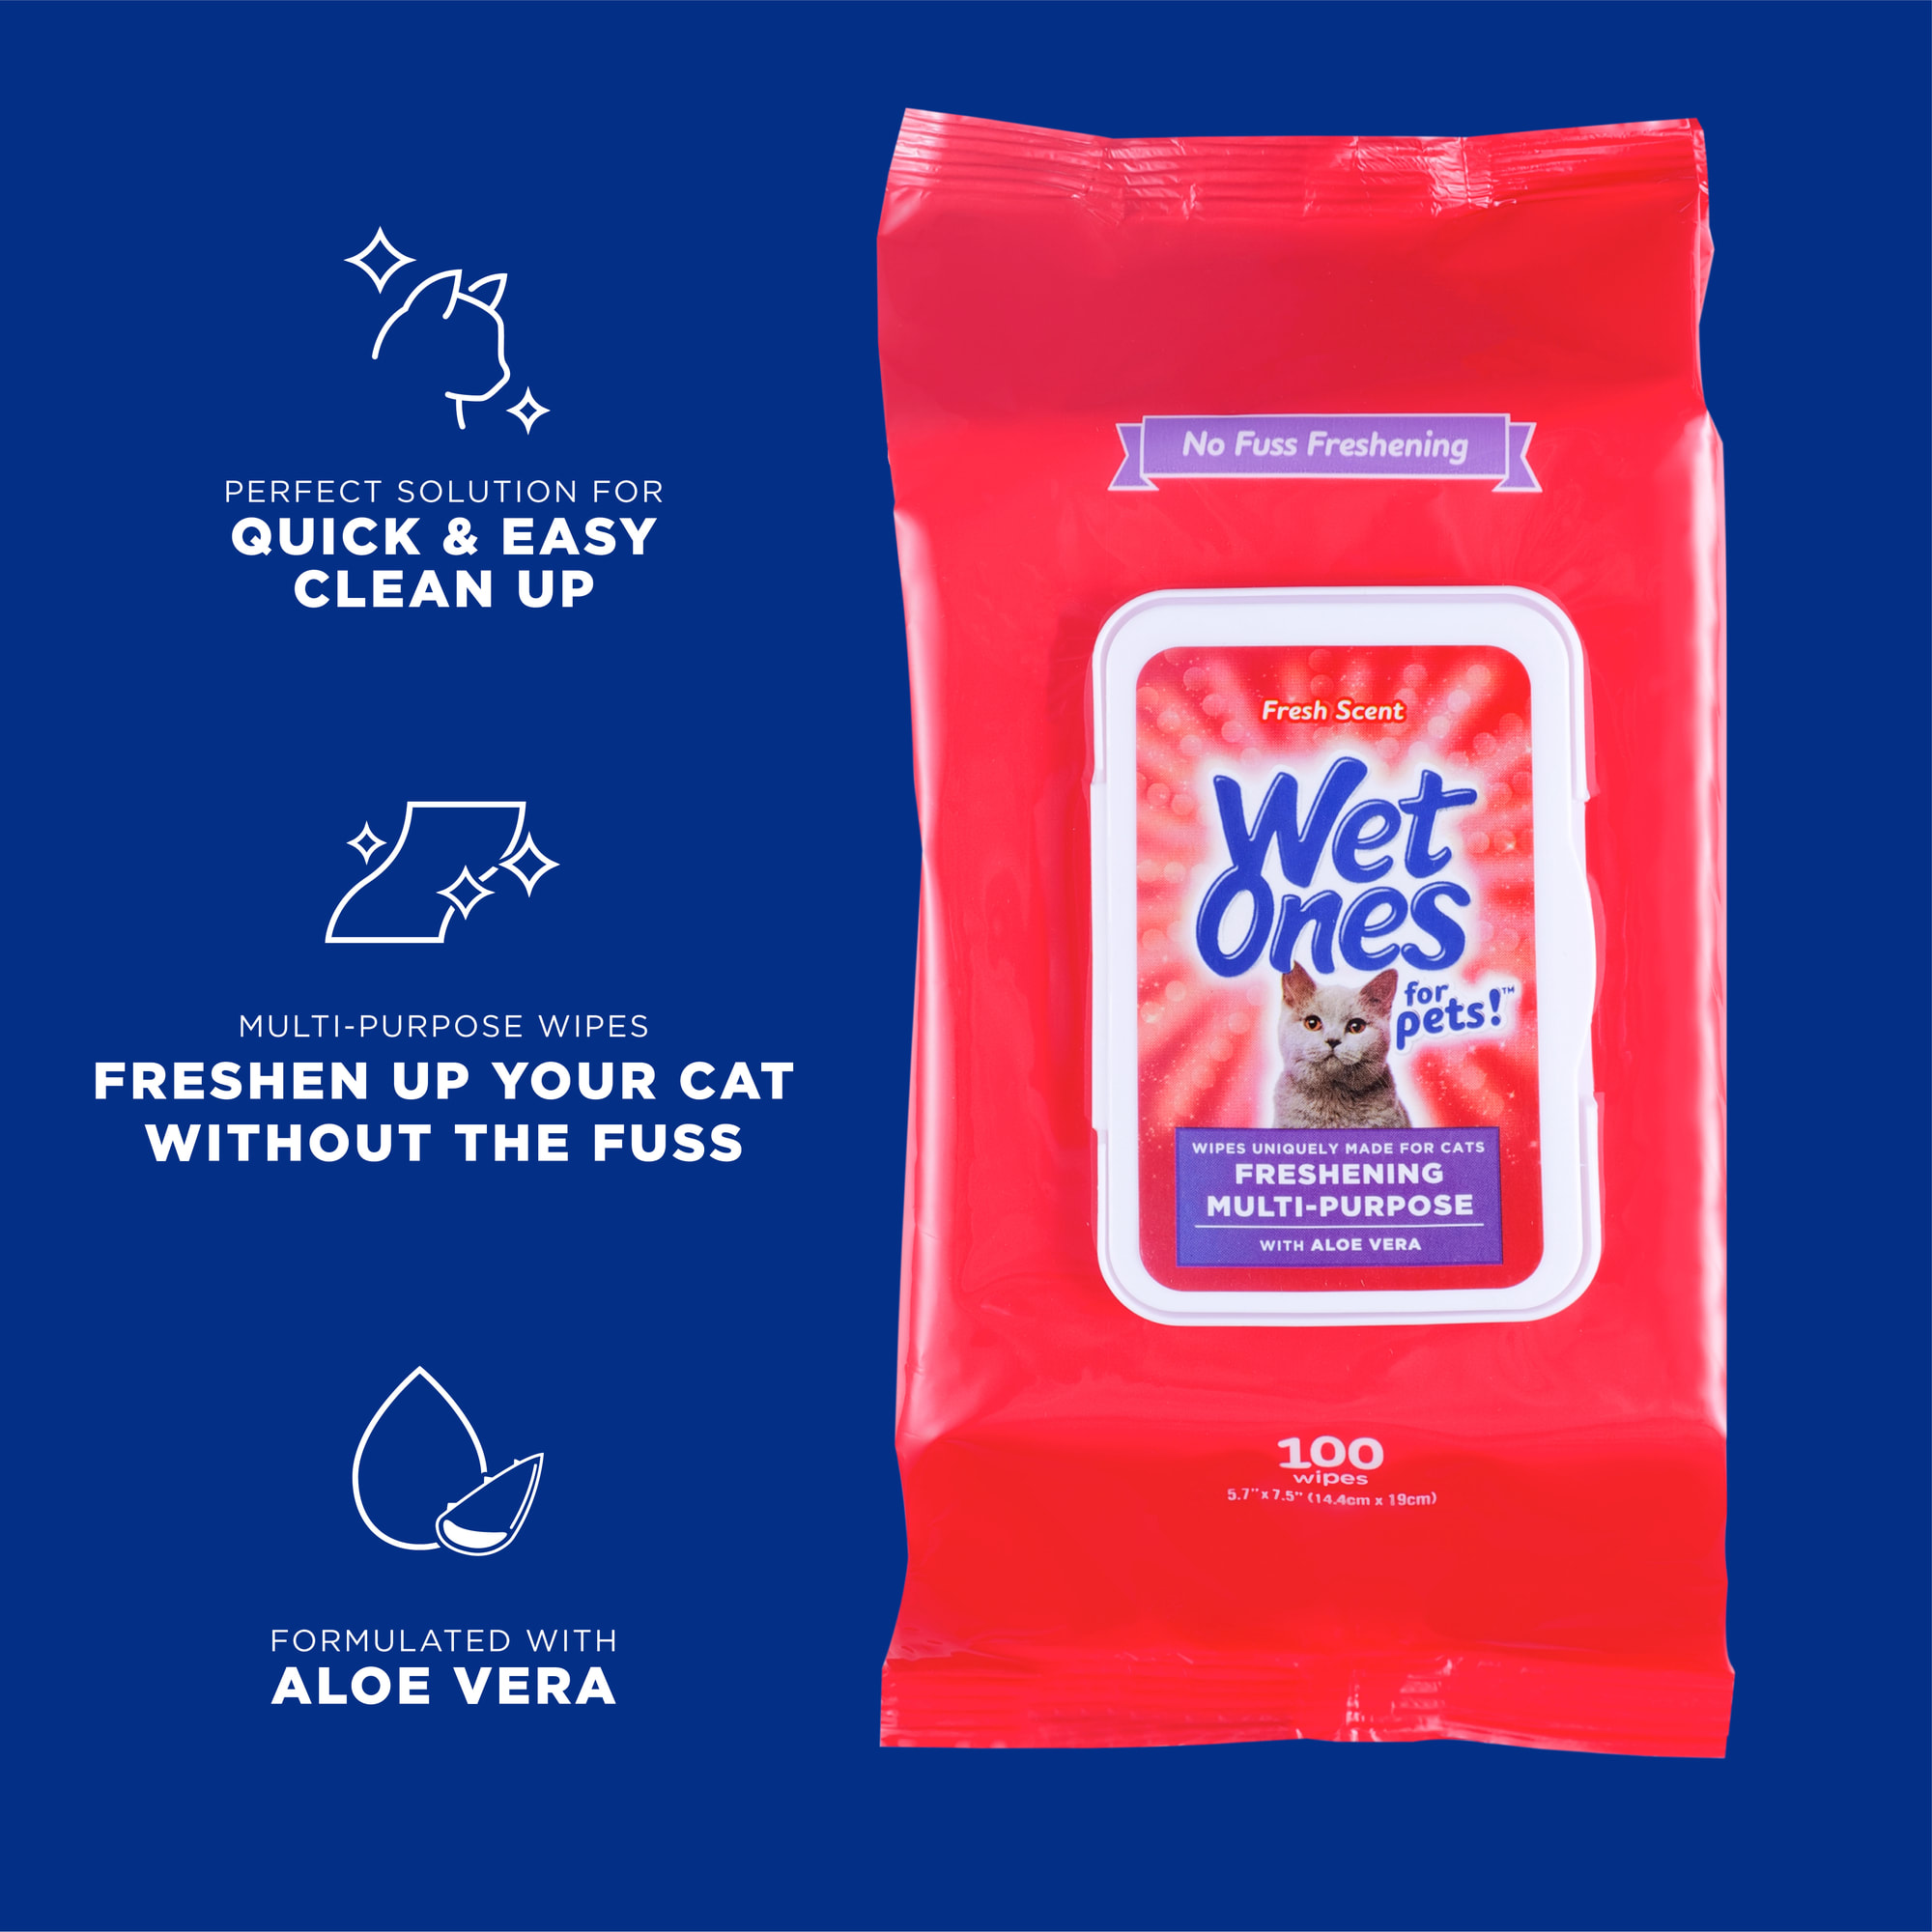 Wet Ones for Pets Freshening Multi-Purpose Cat Wipes with Aloe